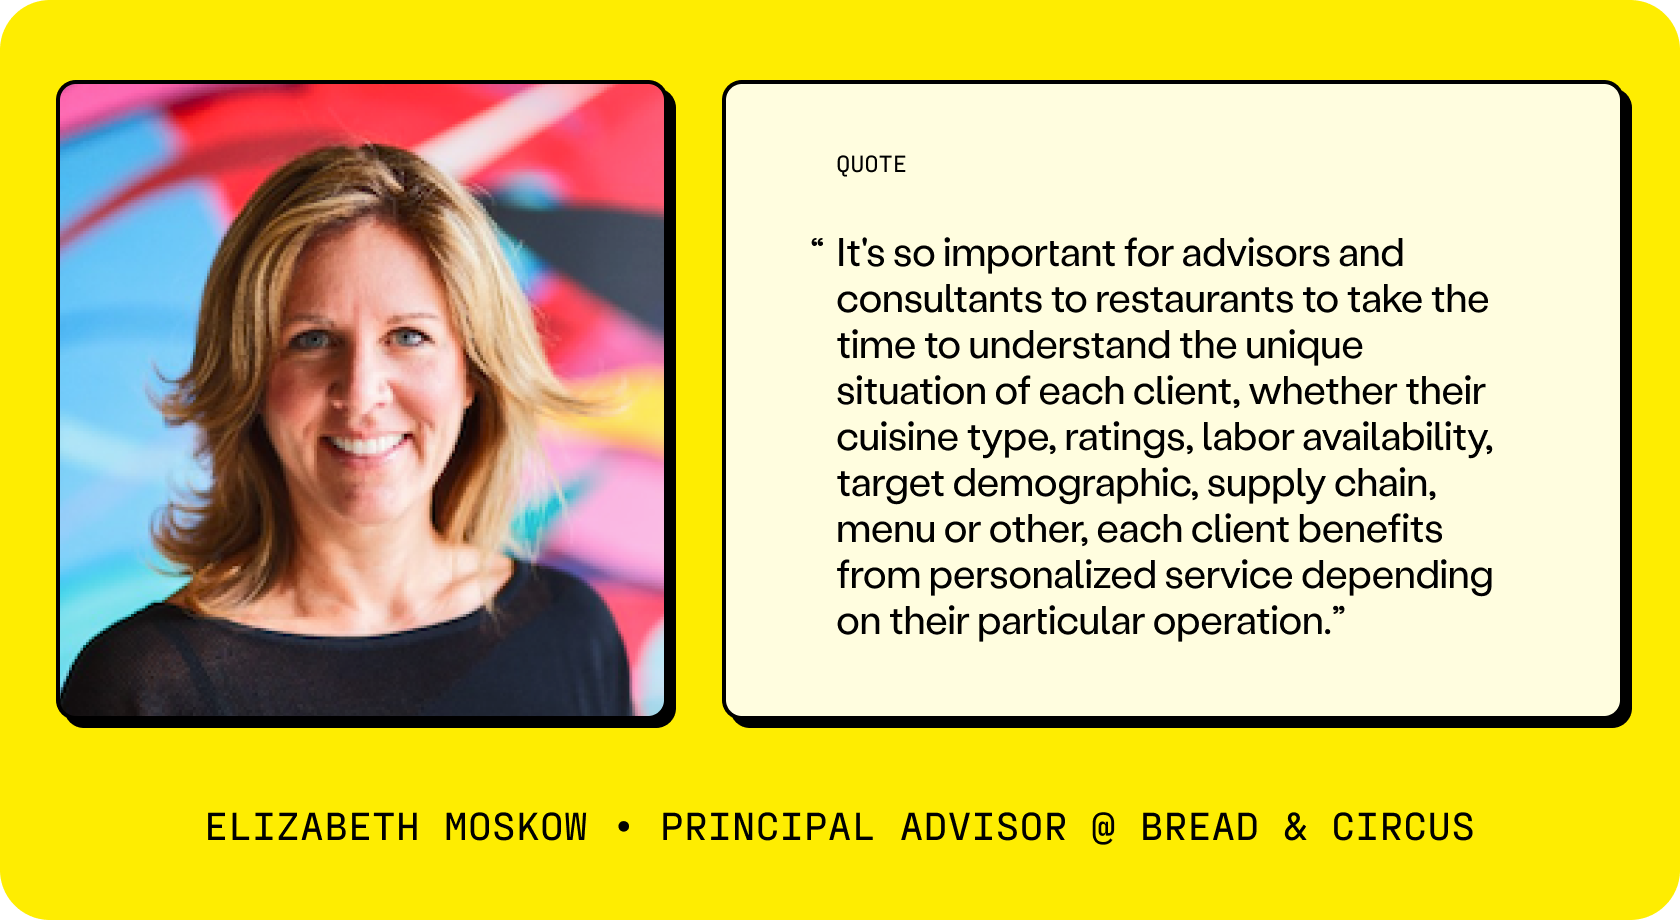 Elizabeth Moskow, Principle Advisor of Bread & Circus says, “It's so important for advisors and consultants to restaurants to take the time to understand the unique situation of each client, whether their cuisine type, ratings, labor availability, target demographic, supply chain, menu or other, each client benefits from personalized service depending on their particular operation.”